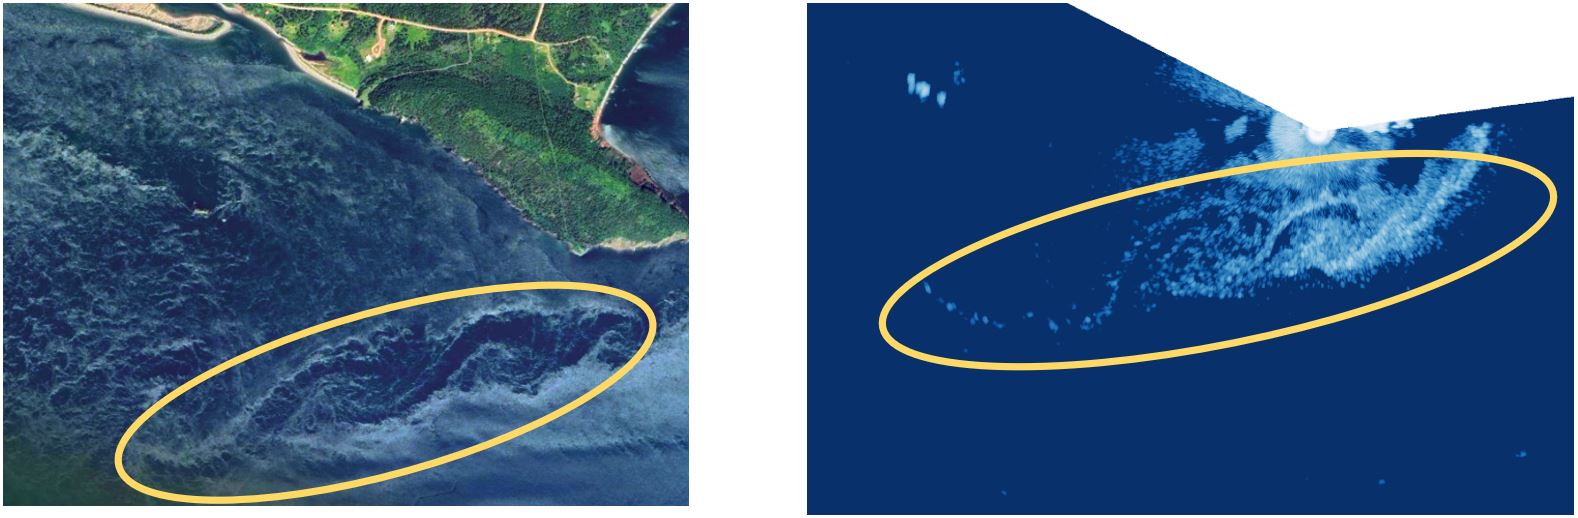 New radar imaging (right panel) reveals spiraling eddies (within yellow ellipse) previously detected via satellite imagery (left panel) in real time, generated during an ebb tide by Cape Sharp in the Minas Passage, Bay of Fundy. Radar-based imaging allows researchers to quantify hydrodynamics so that fish distributions in relation to eddies, wakes and turbulence features can be better understood.  See time-lapse video of radar data in the Minas Passage: https://fundyforcelive.ca/#!/radar